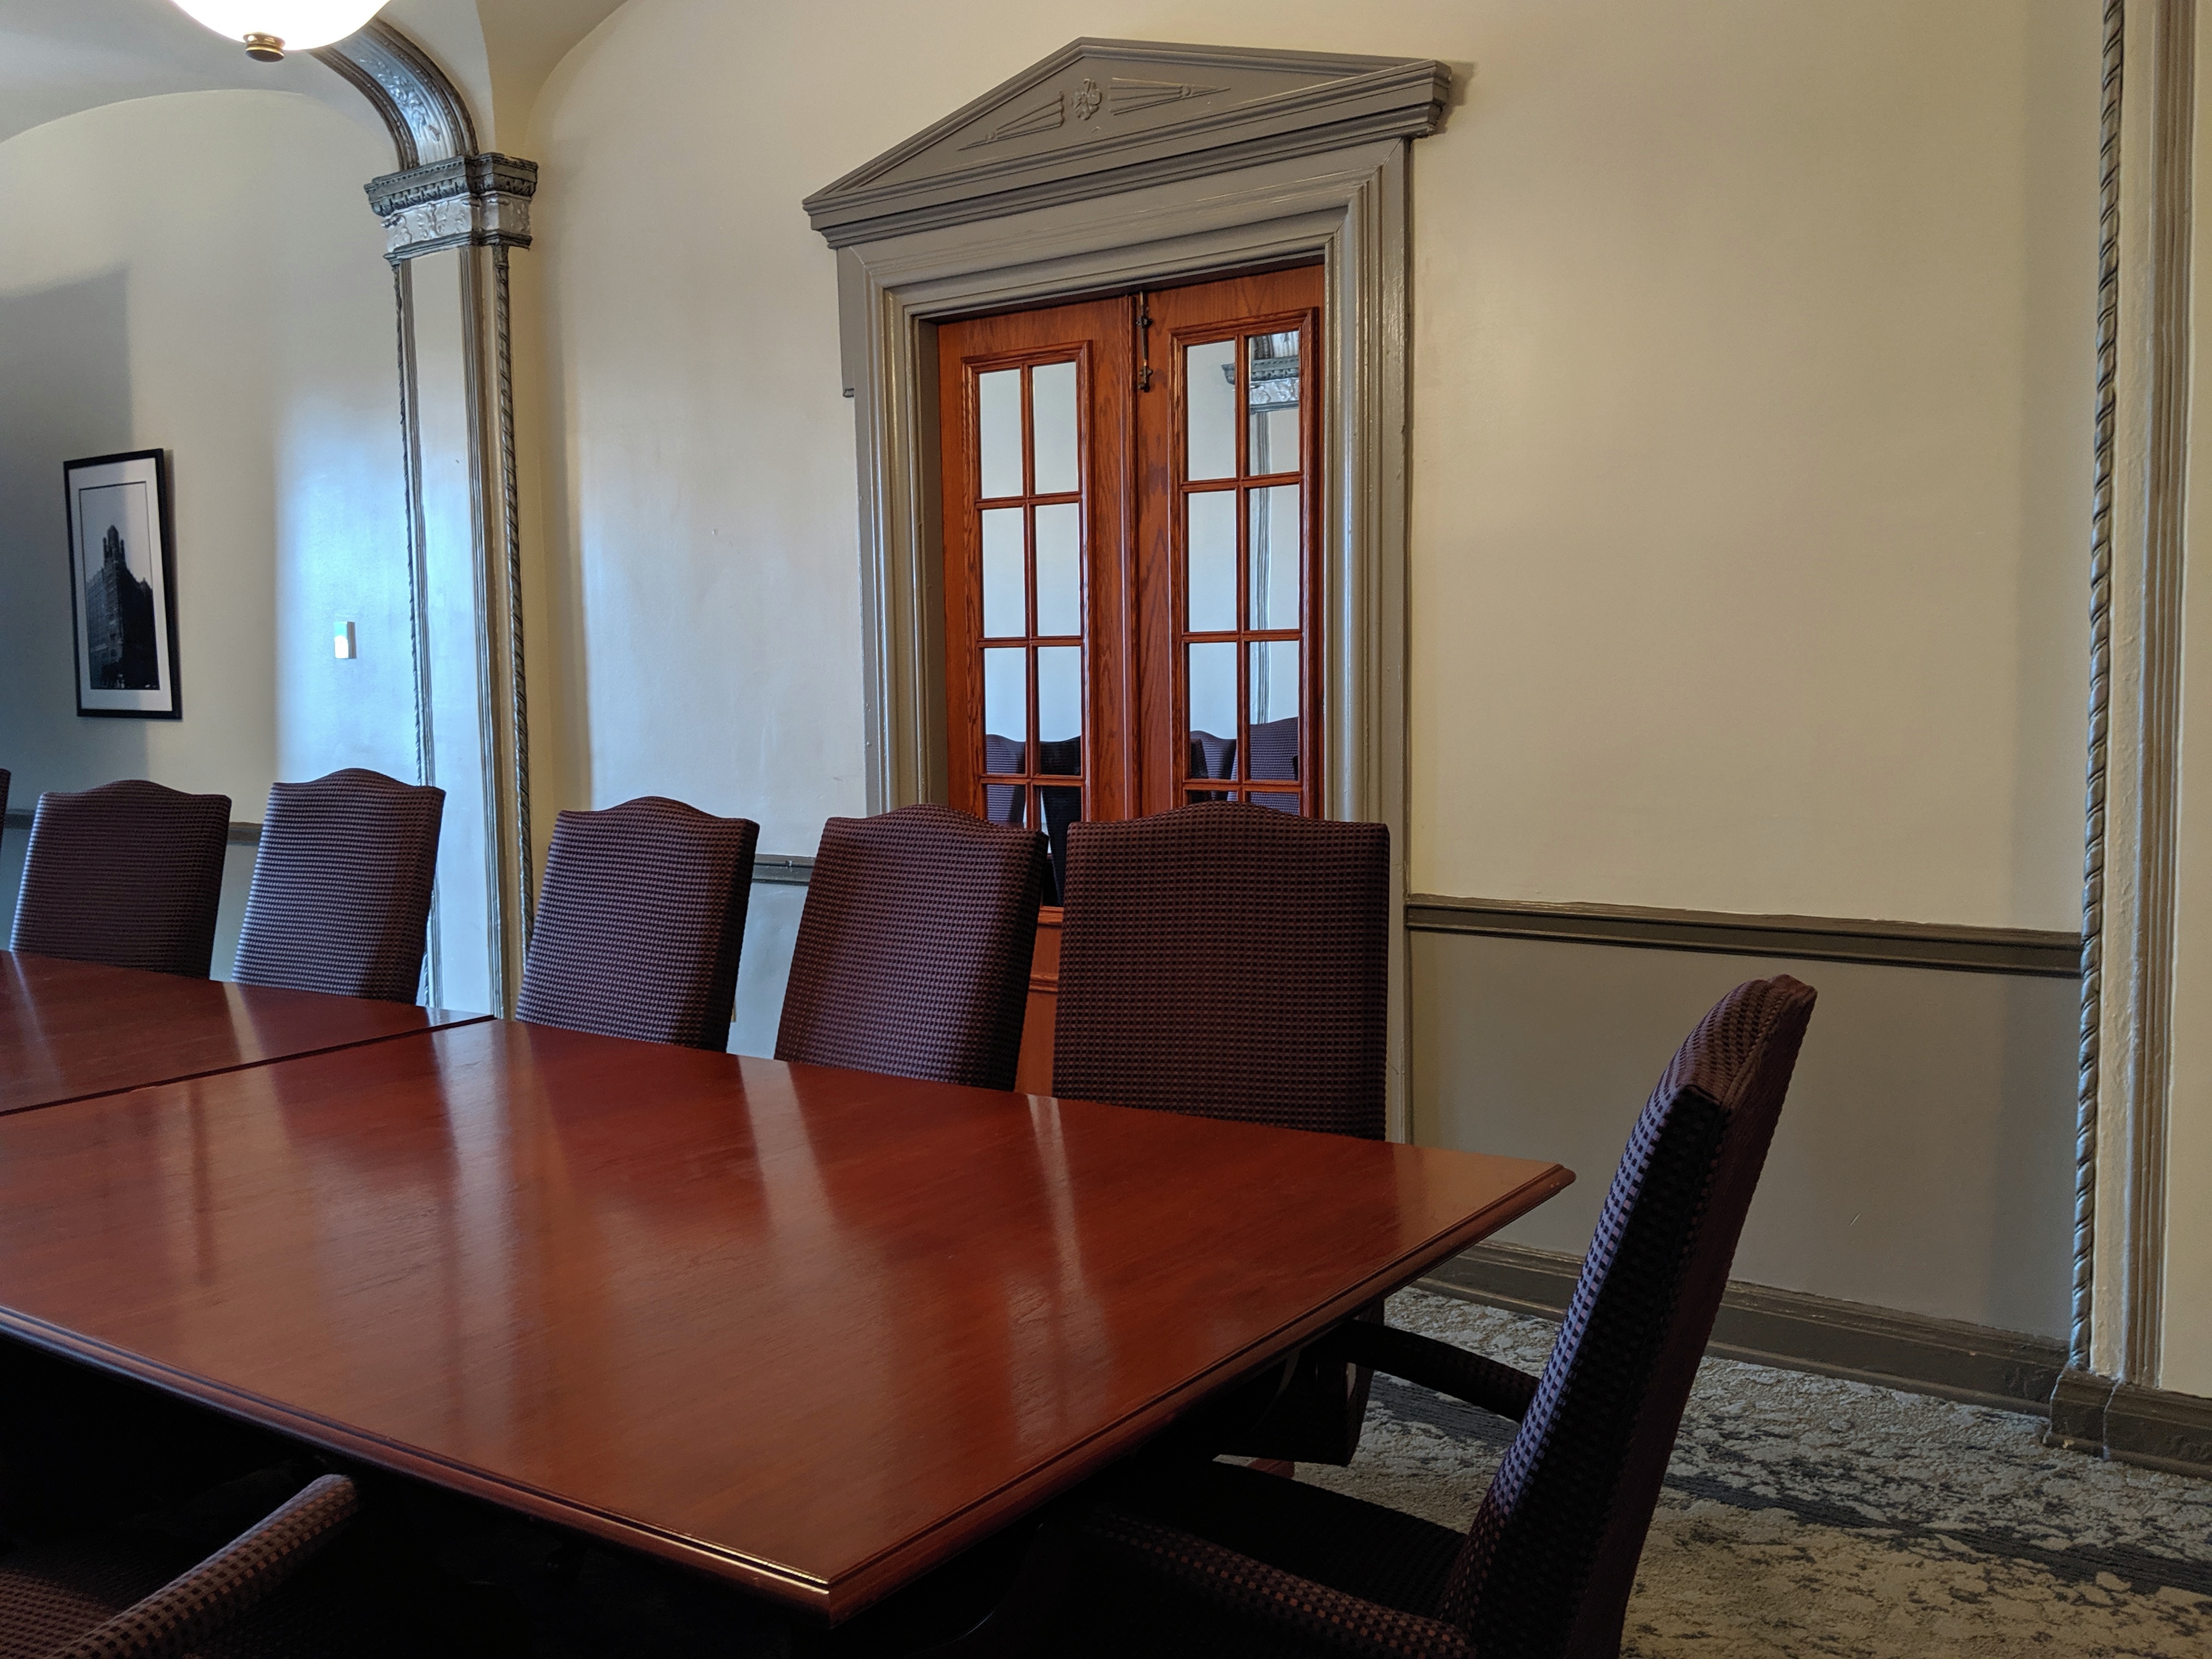 Partial View of Meeting Room with Large Table